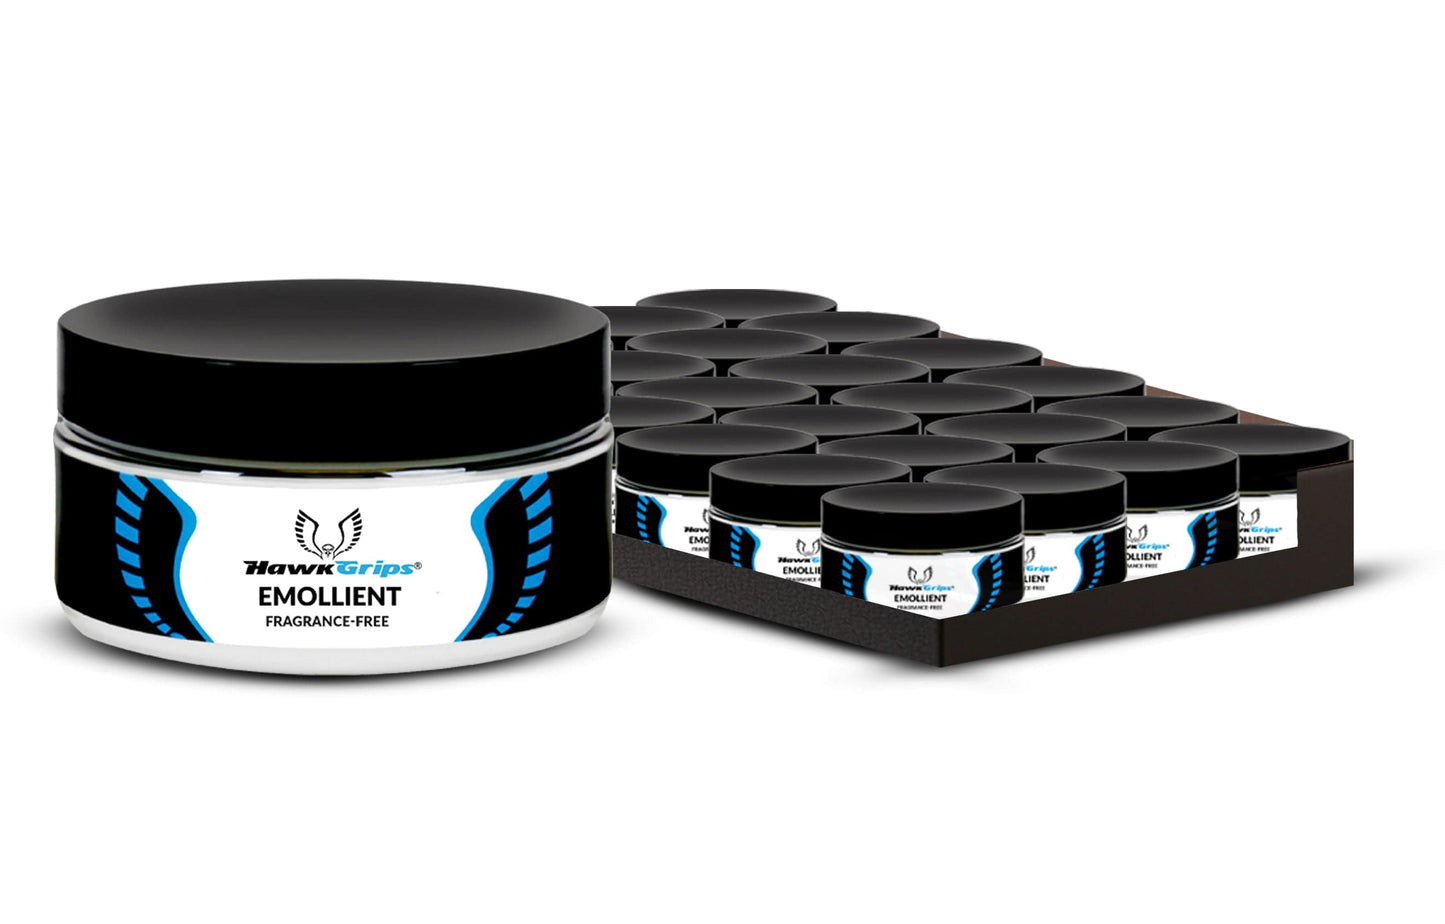 HawkGrips Topicals Fragrance-Free / 24 Jars Emollient (Course Discount)